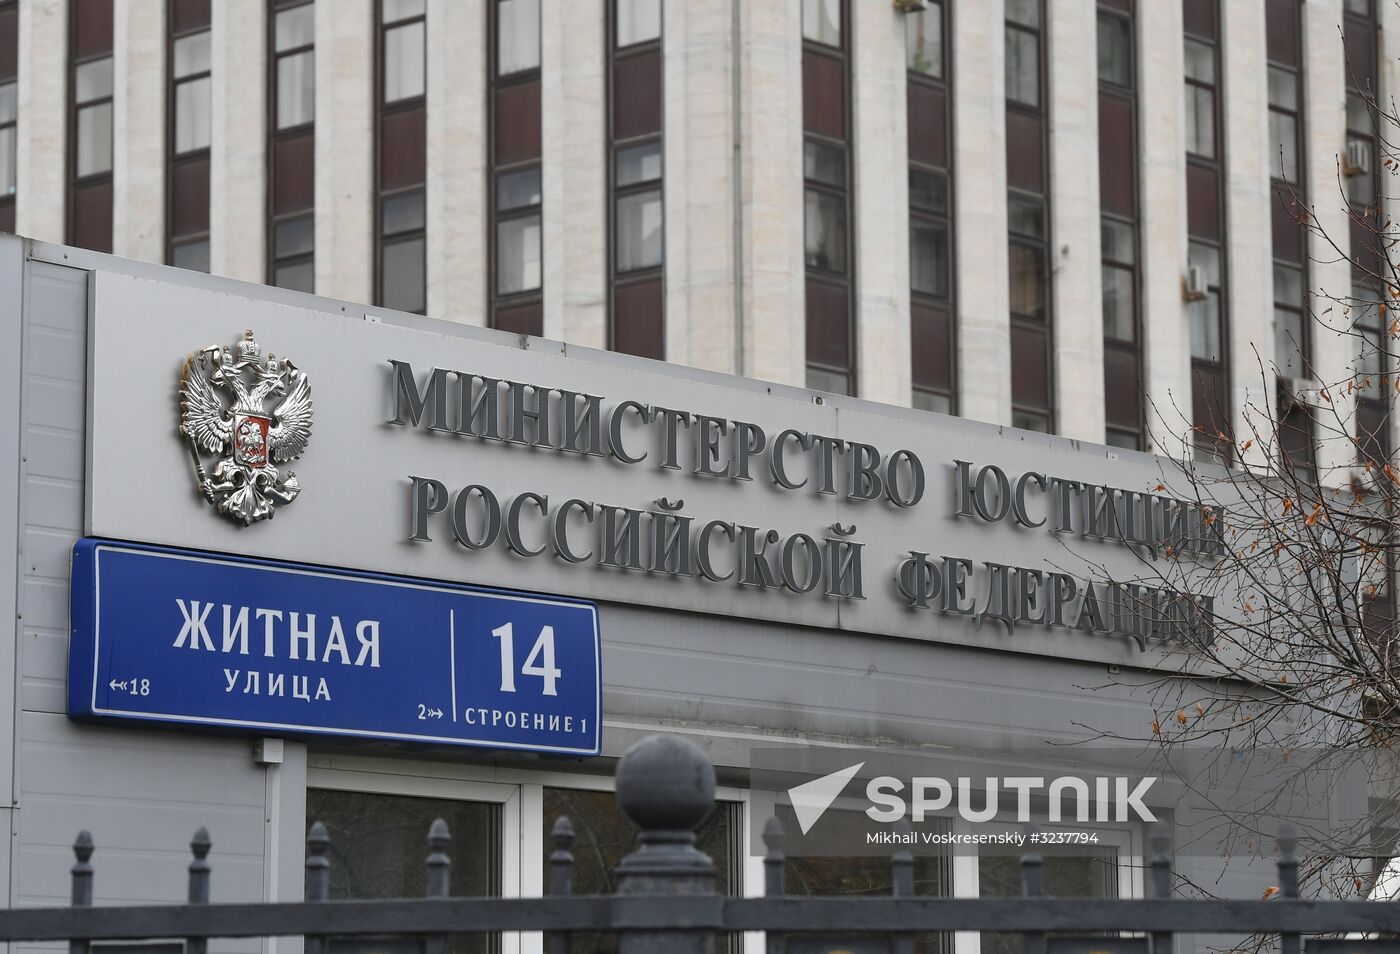 Justice Ministry of the Russian Federation